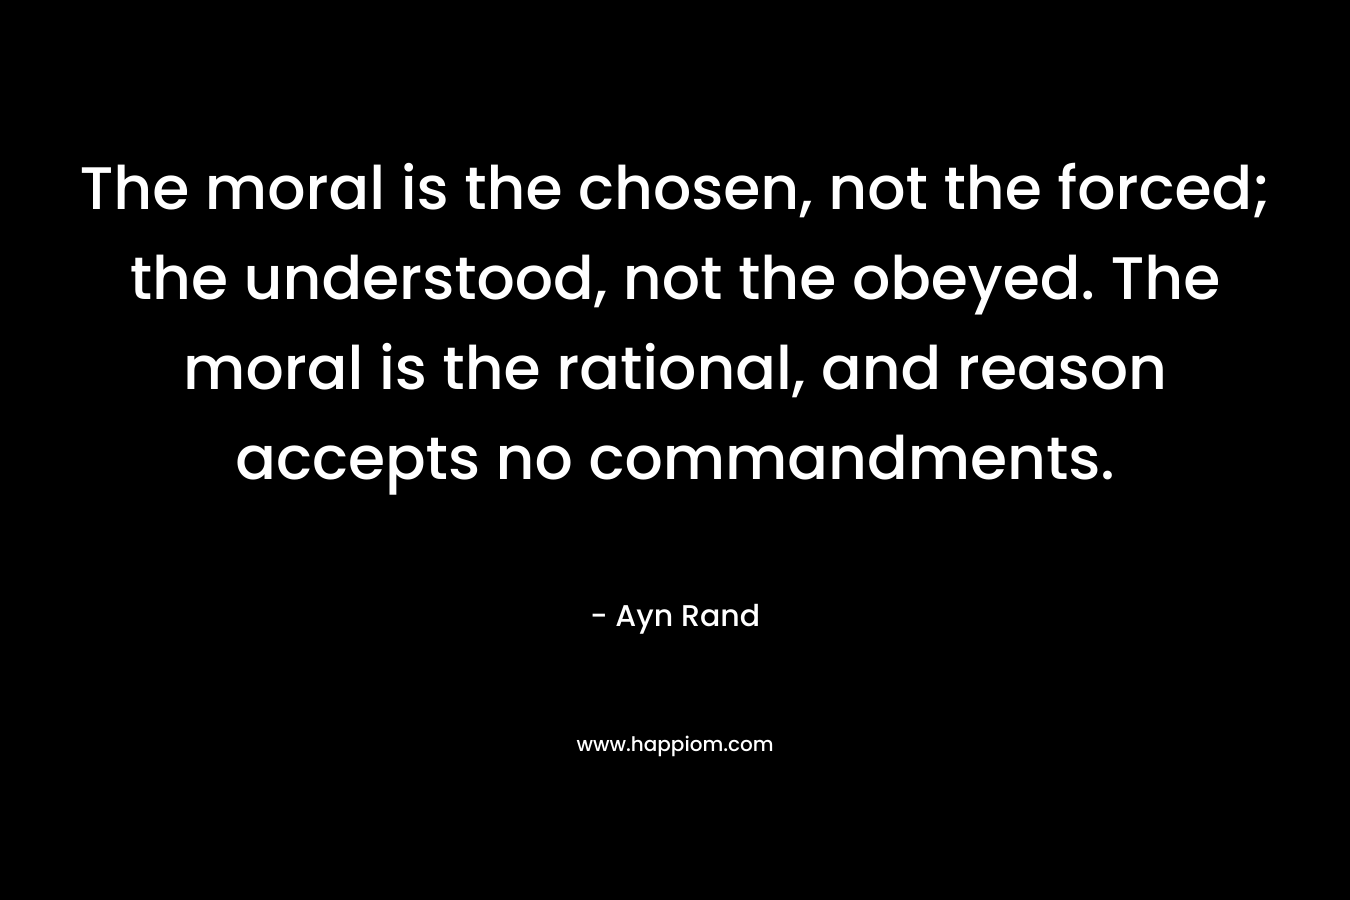 The moral is the chosen, not the forced; the understood, not the obeyed. The moral is the rational, and reason accepts no commandments.